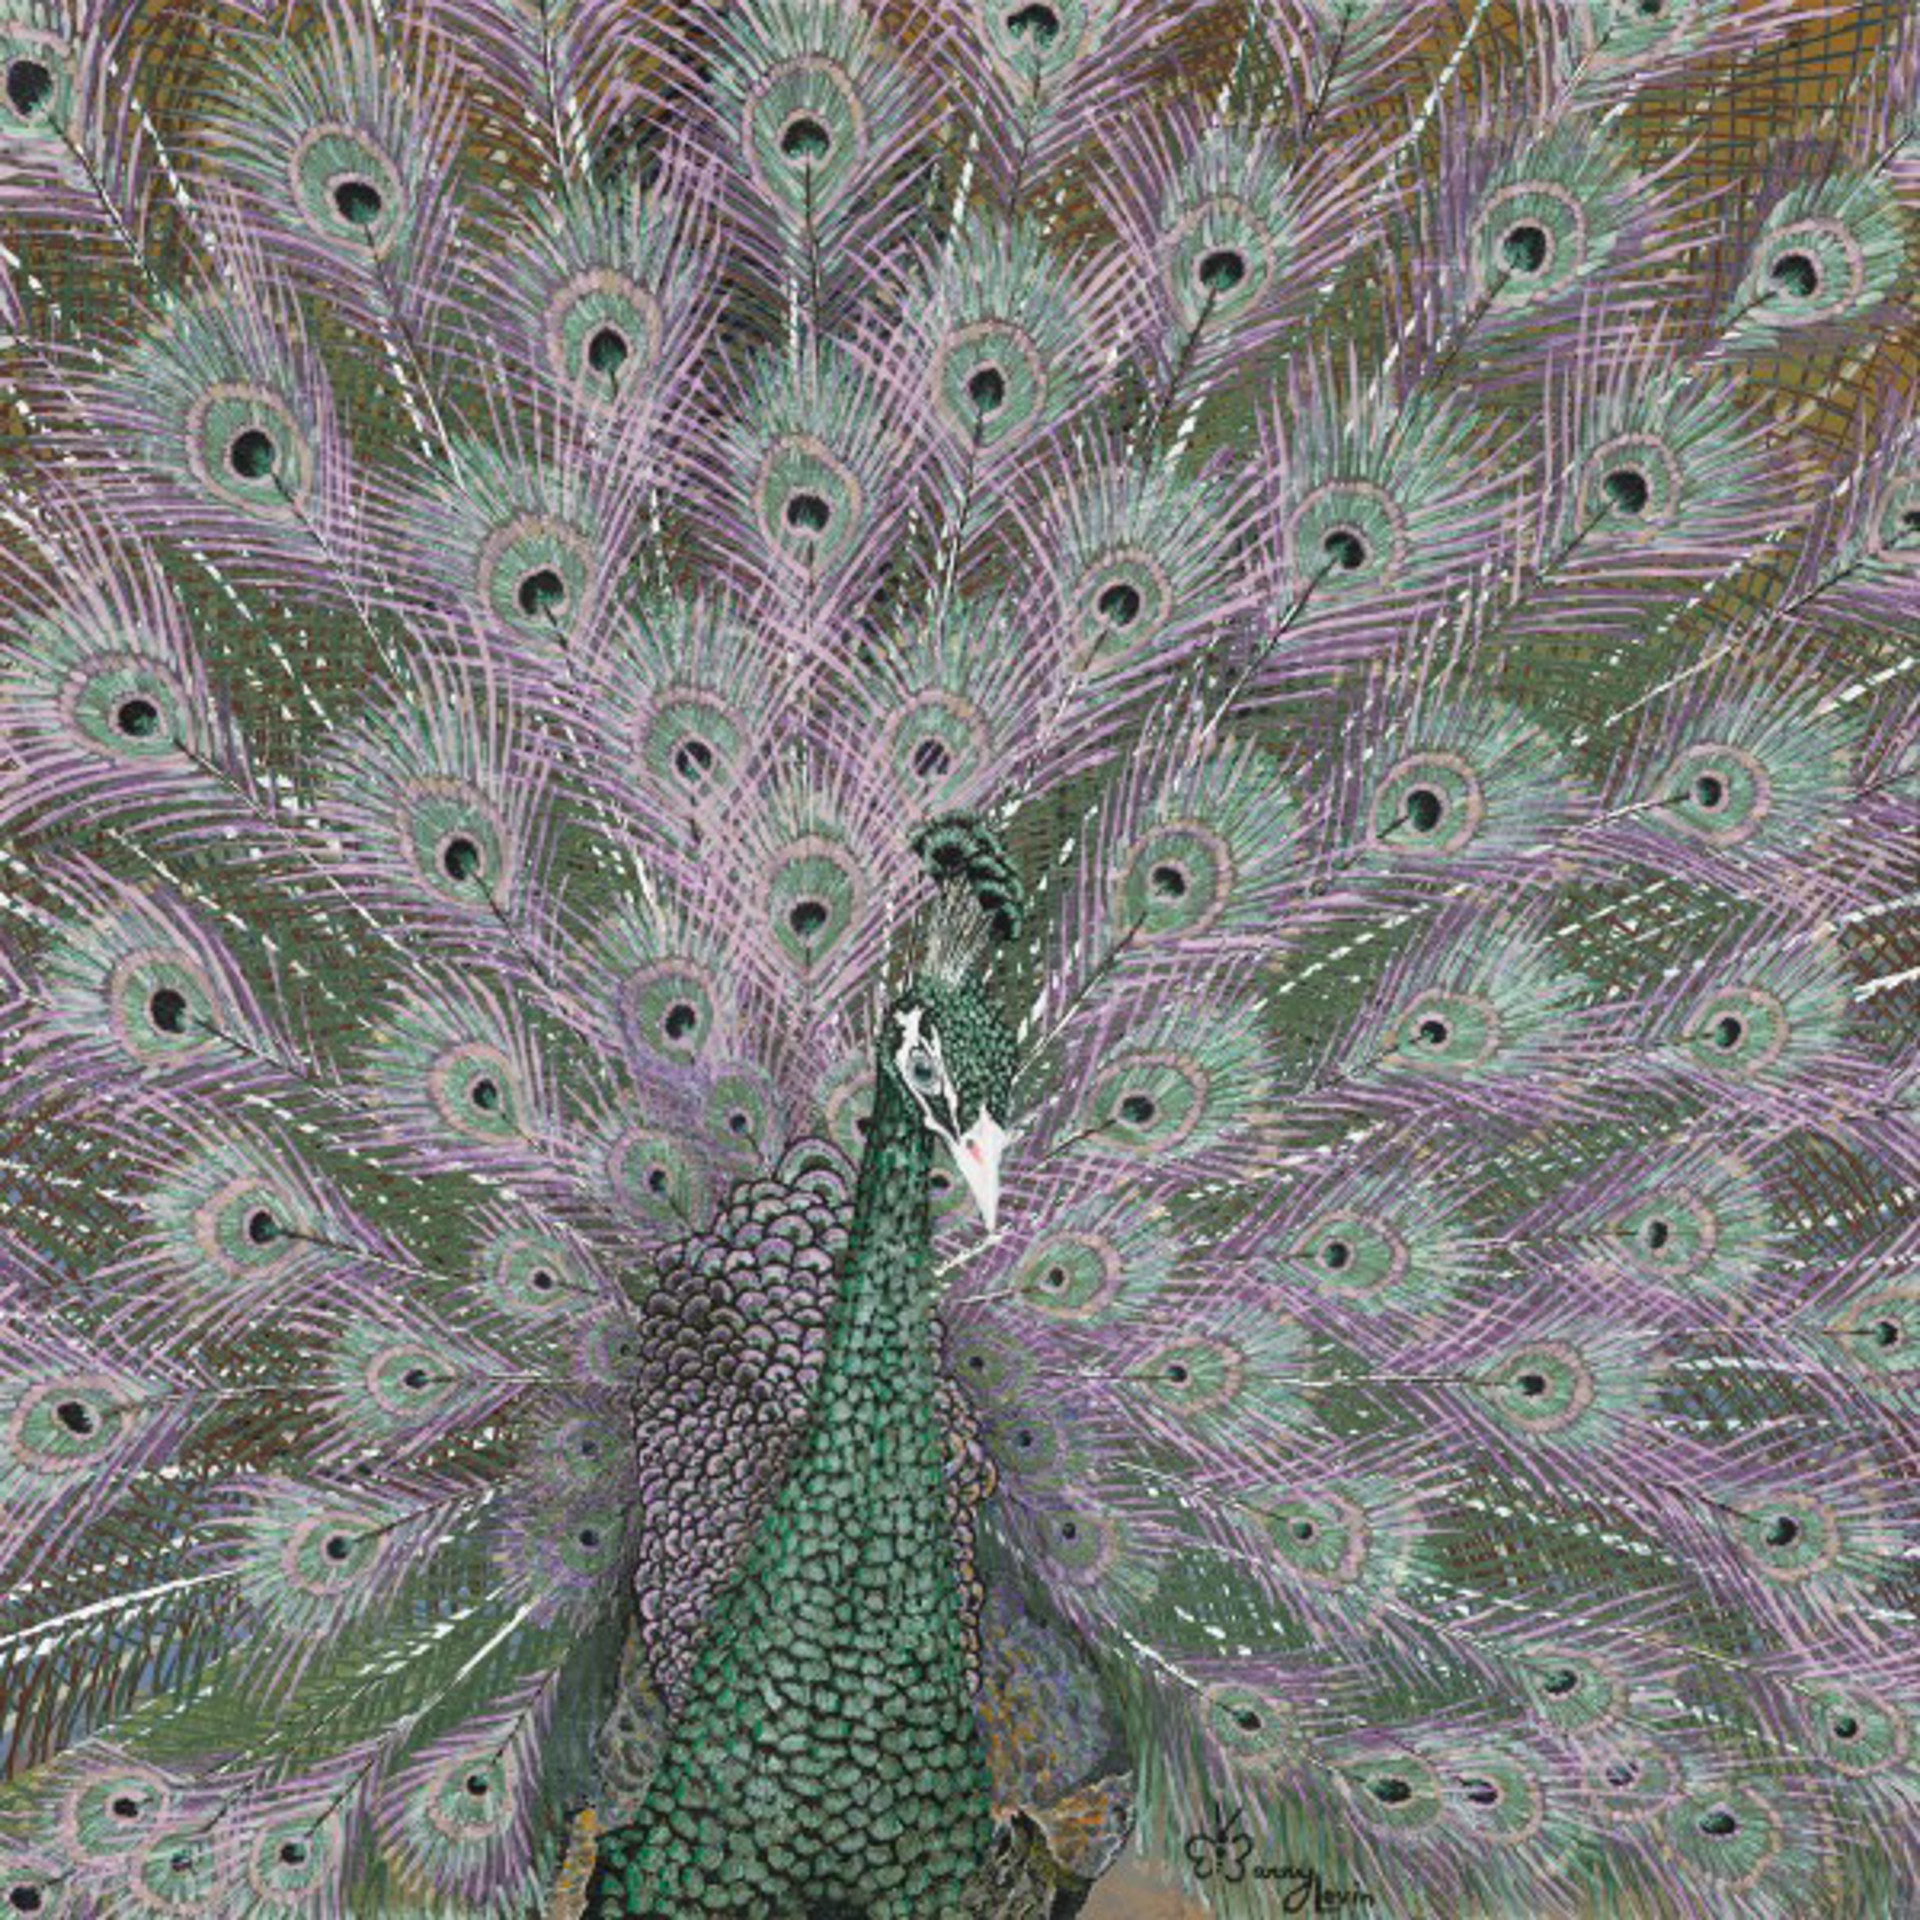 Buford Bronze Peacock by Barry Levin